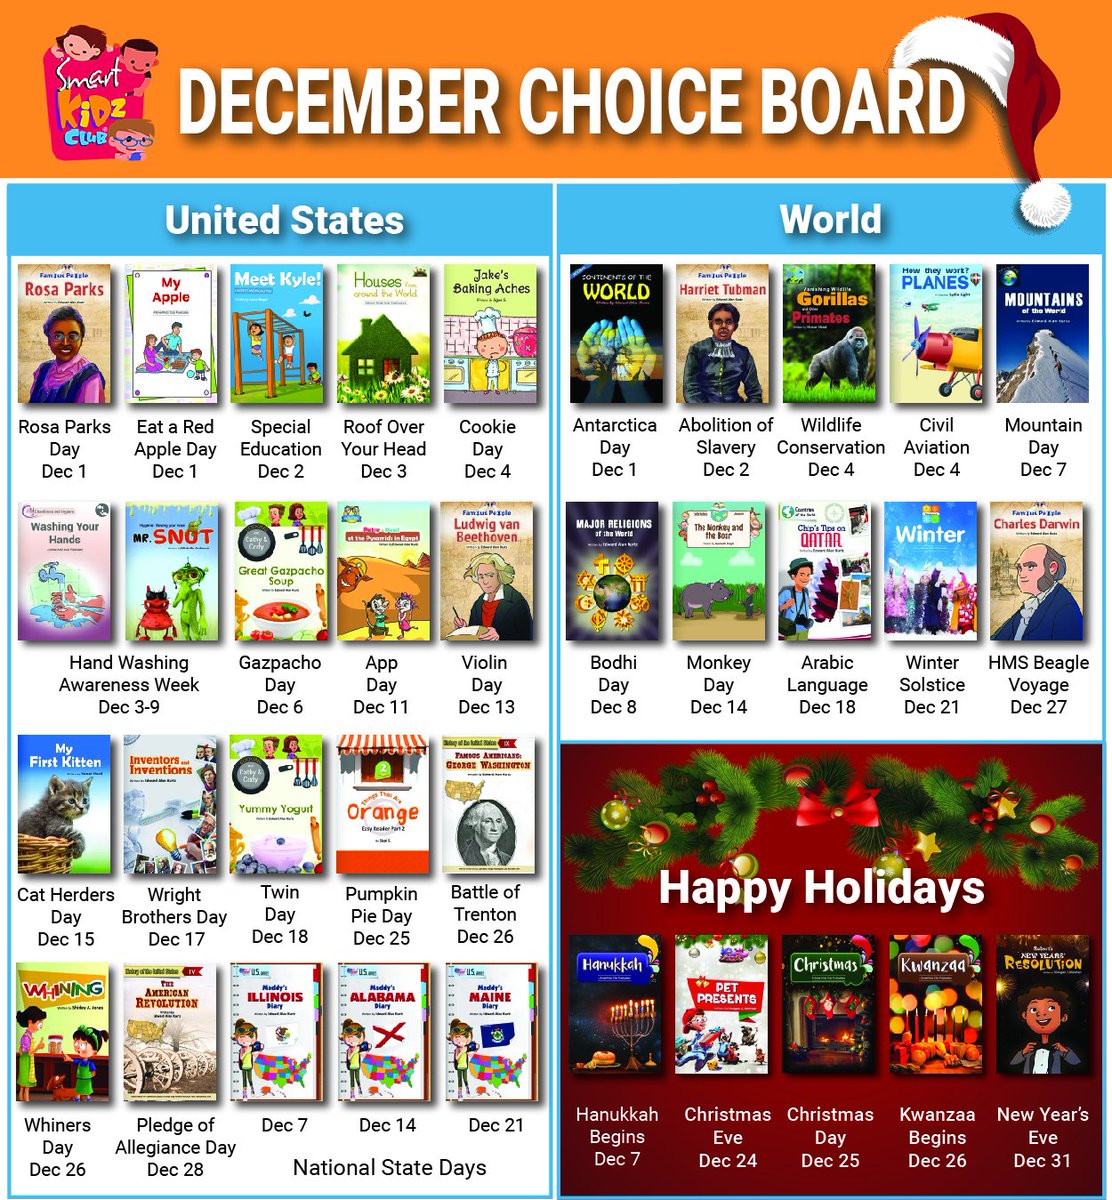 December Choice Board! Our digital educational library consists of a host of freshly written children's books for a diverse and global audience. All books read aloud in a human voice. #bookstoread #kidsbooks #edtech #mobileapp